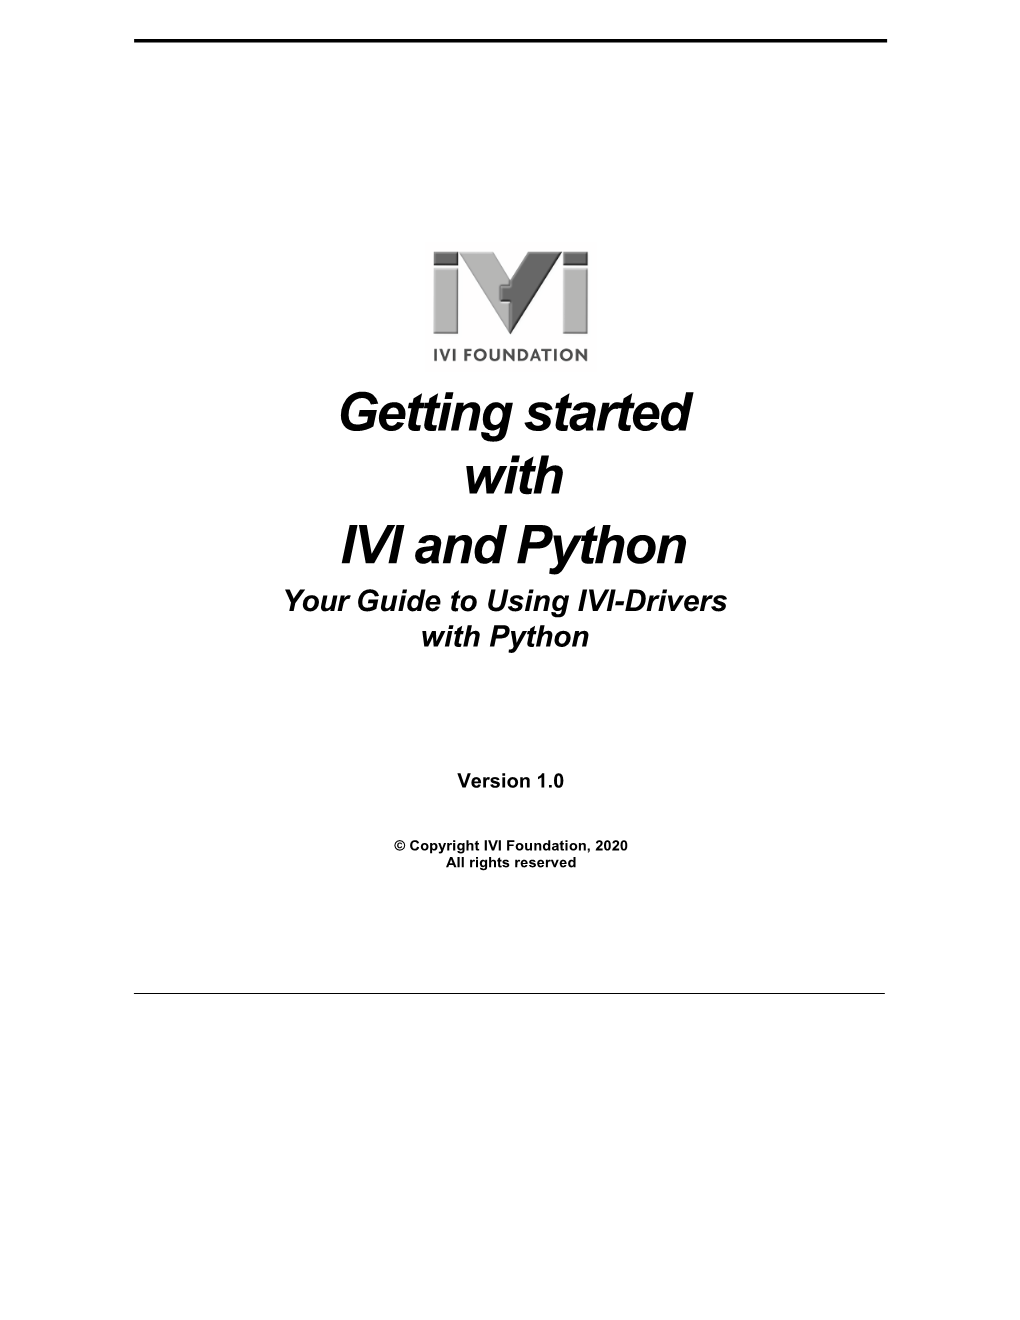 Getting Started with IVI and Python Your Guide to Using IVI-Drivers with Python